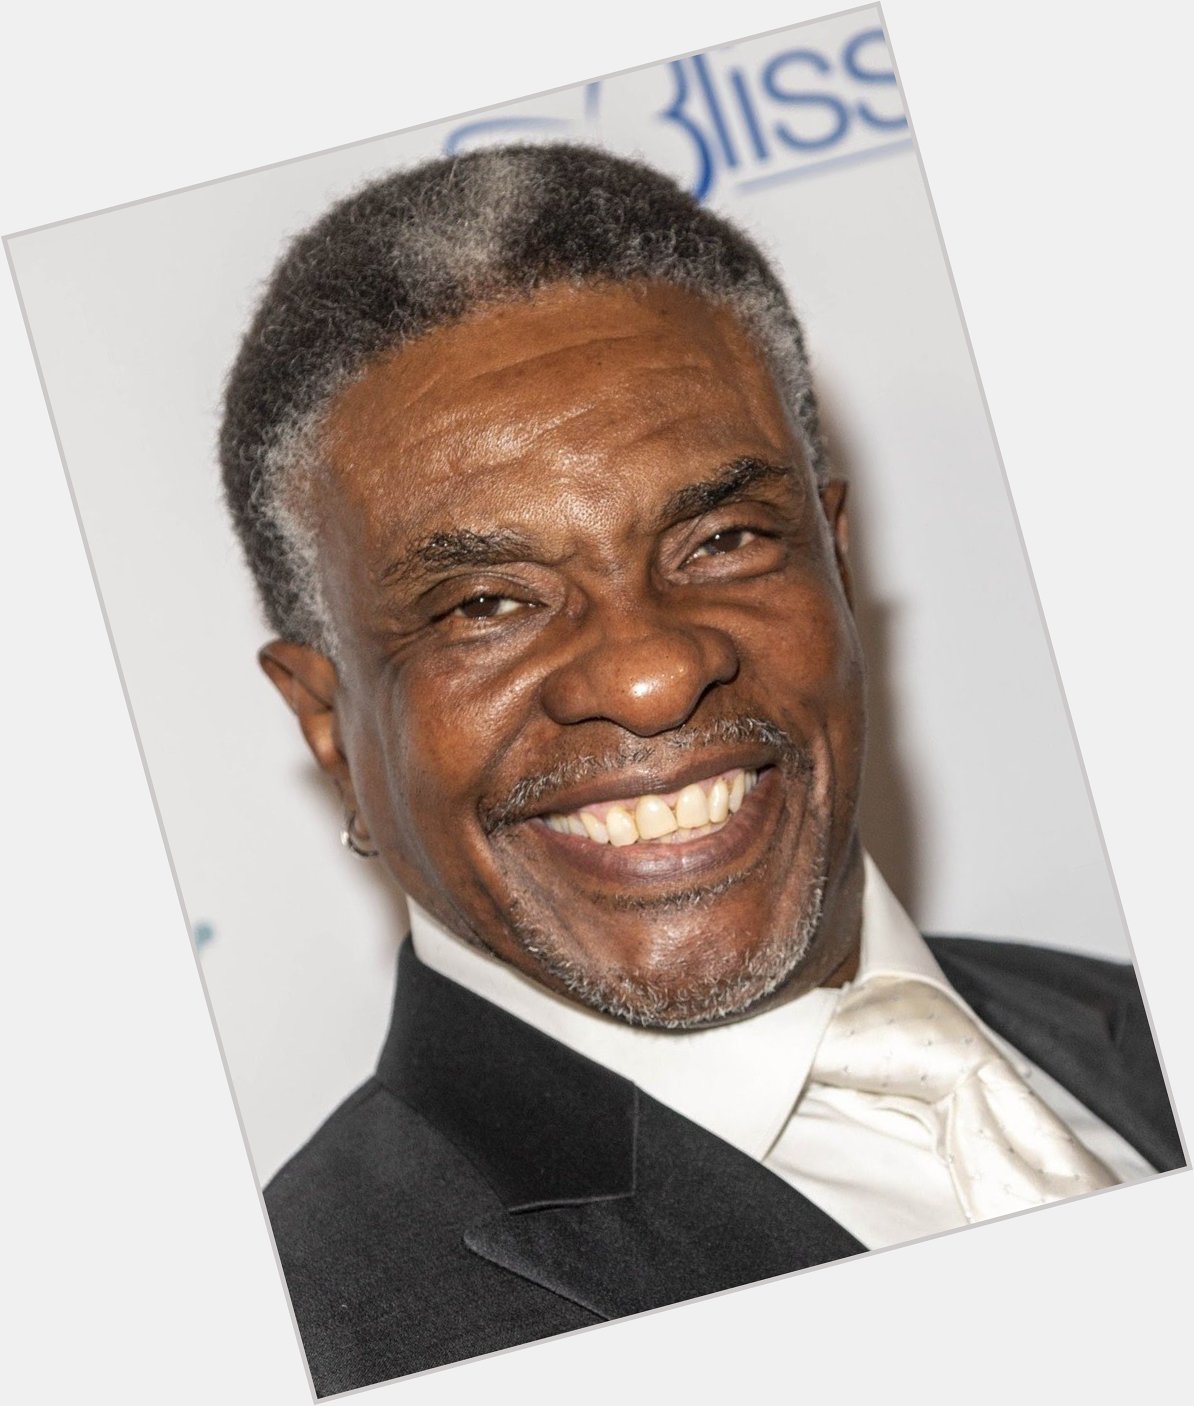 Happy 65th birthday to Keith David

Also known as the arbiter and seargant Foley from MW2 